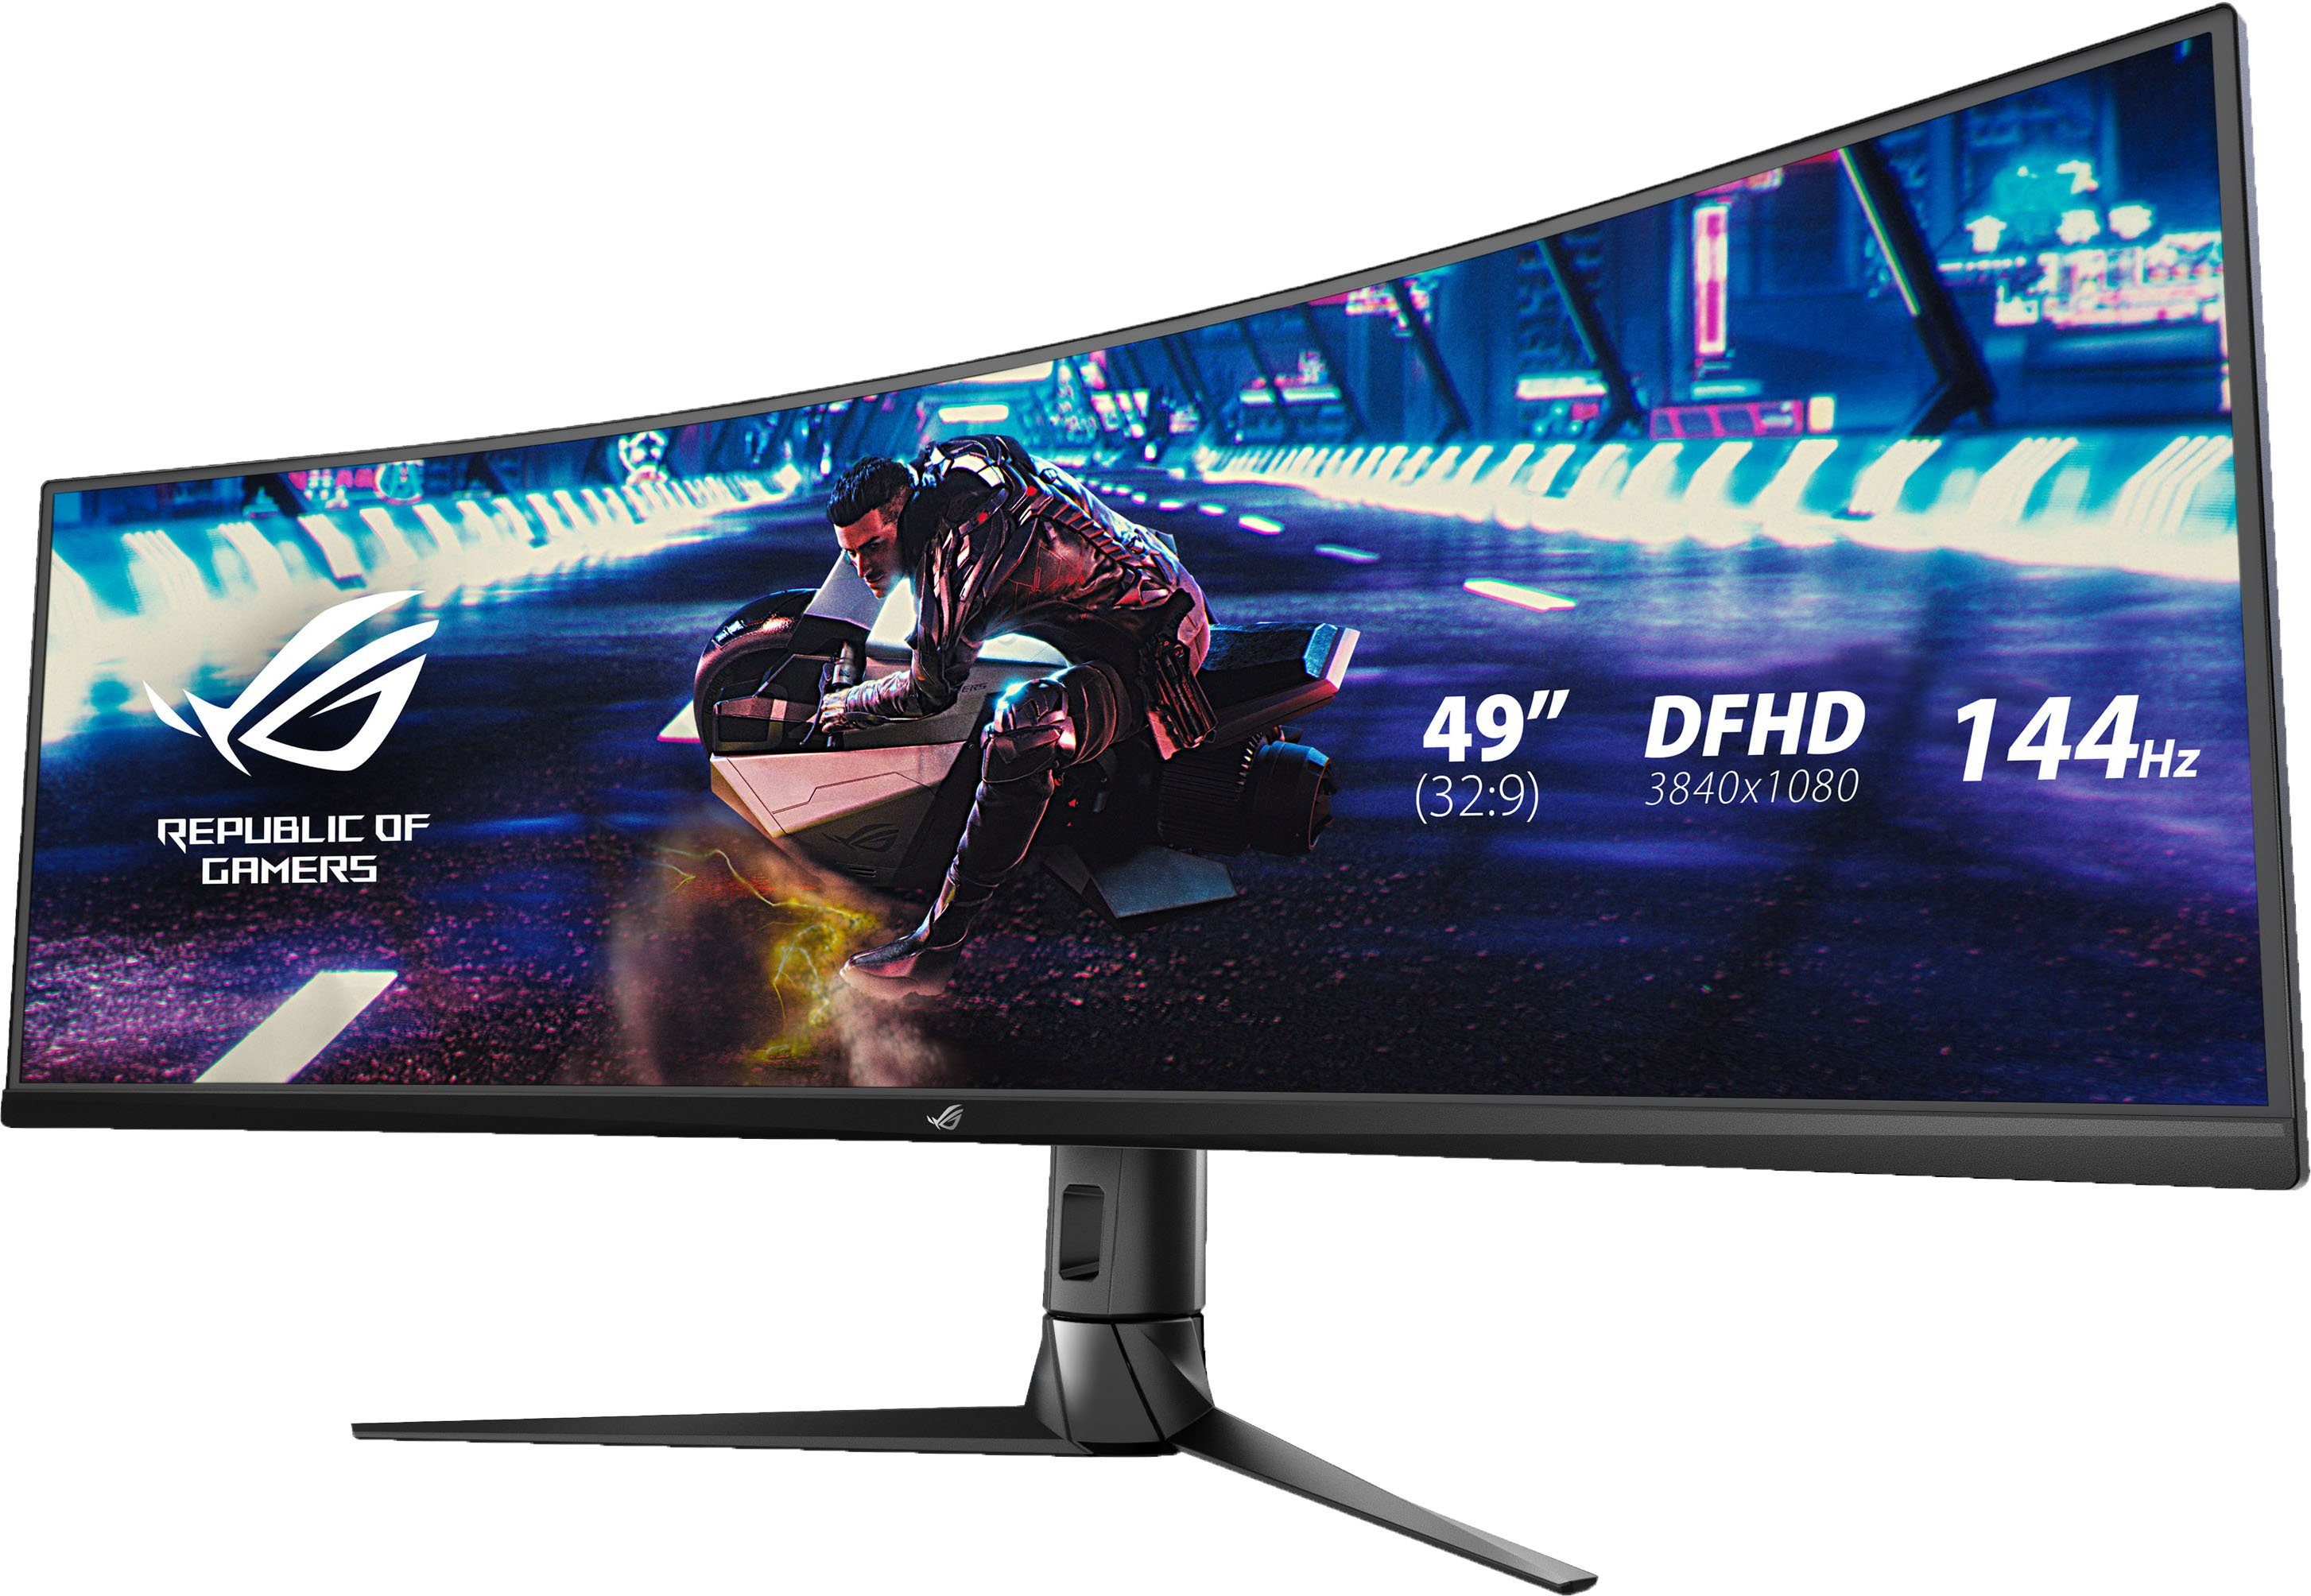 cm/49 px, Asus 1080 HD, ", 4 (124,46 LED, ms 3840 Full VA Hz, XG49VQ 144 Gaming Reaktionszeit, Monitor) Curved-Gaming-Monitor x